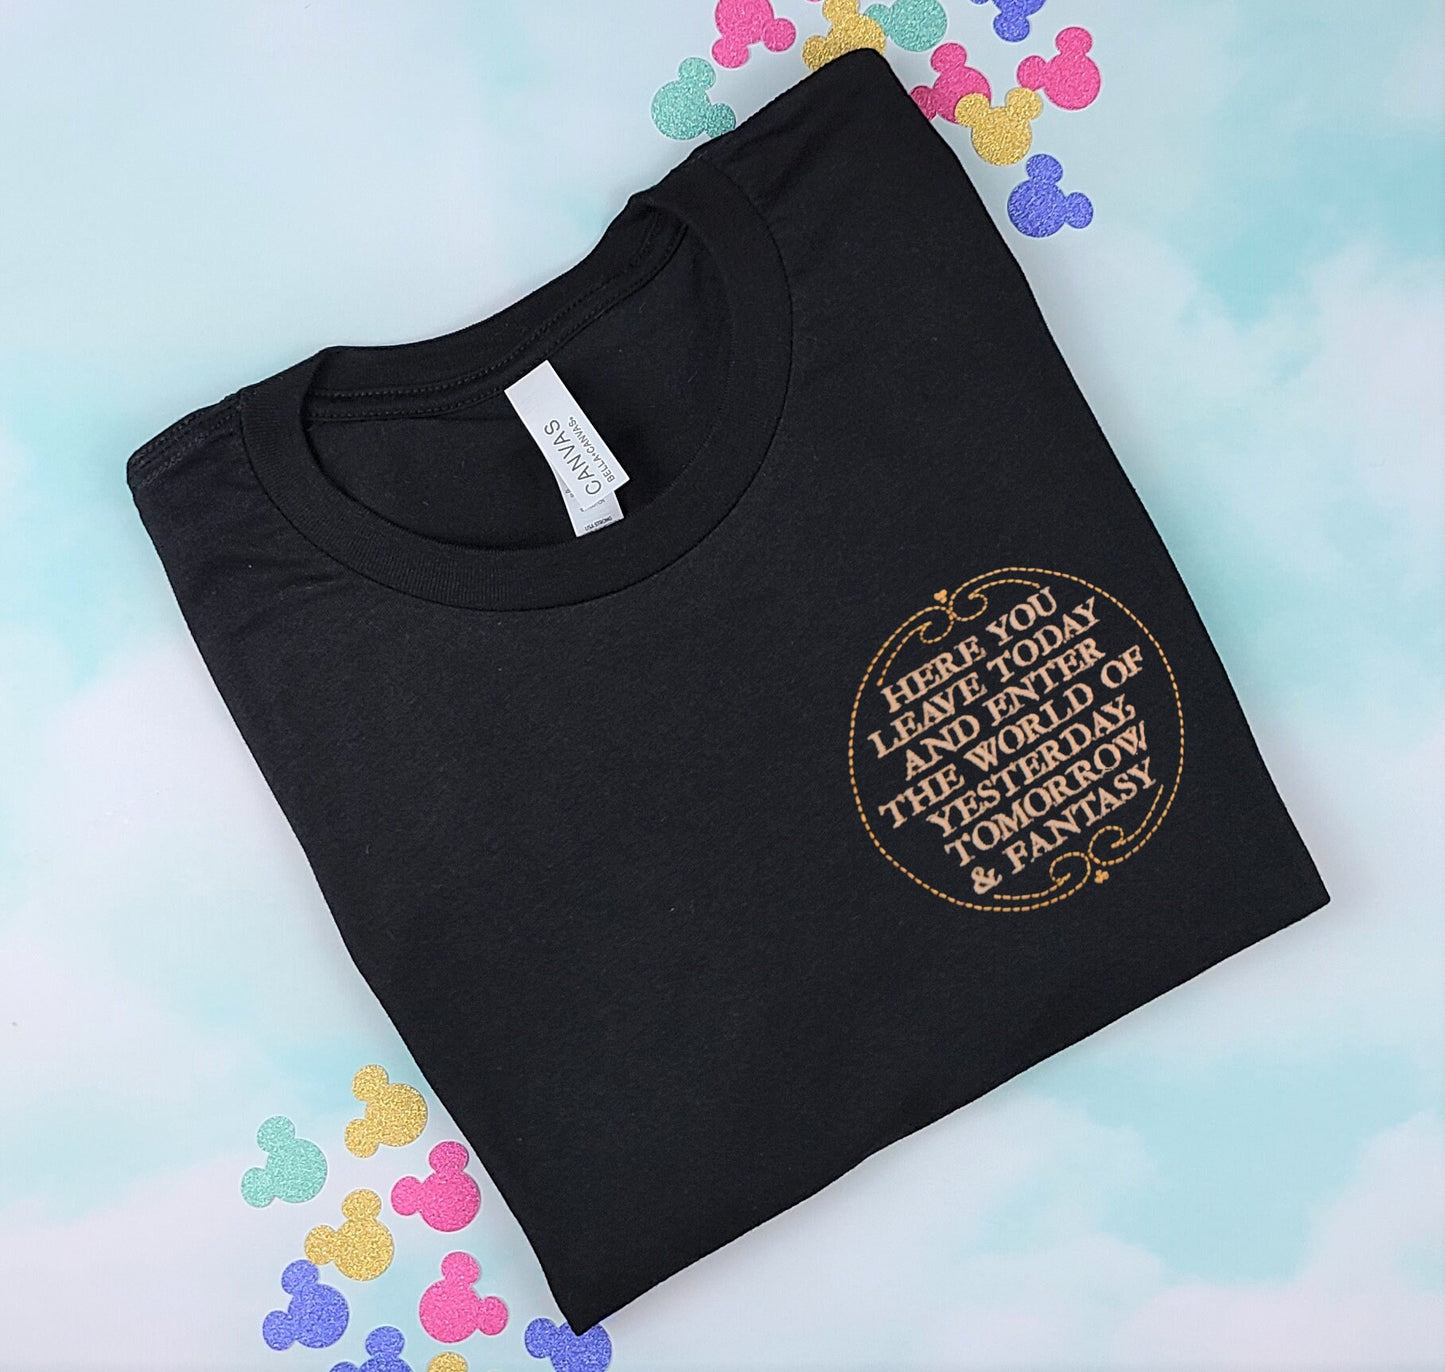 Disney World Welcome Plaque Black Embroidered Shirt